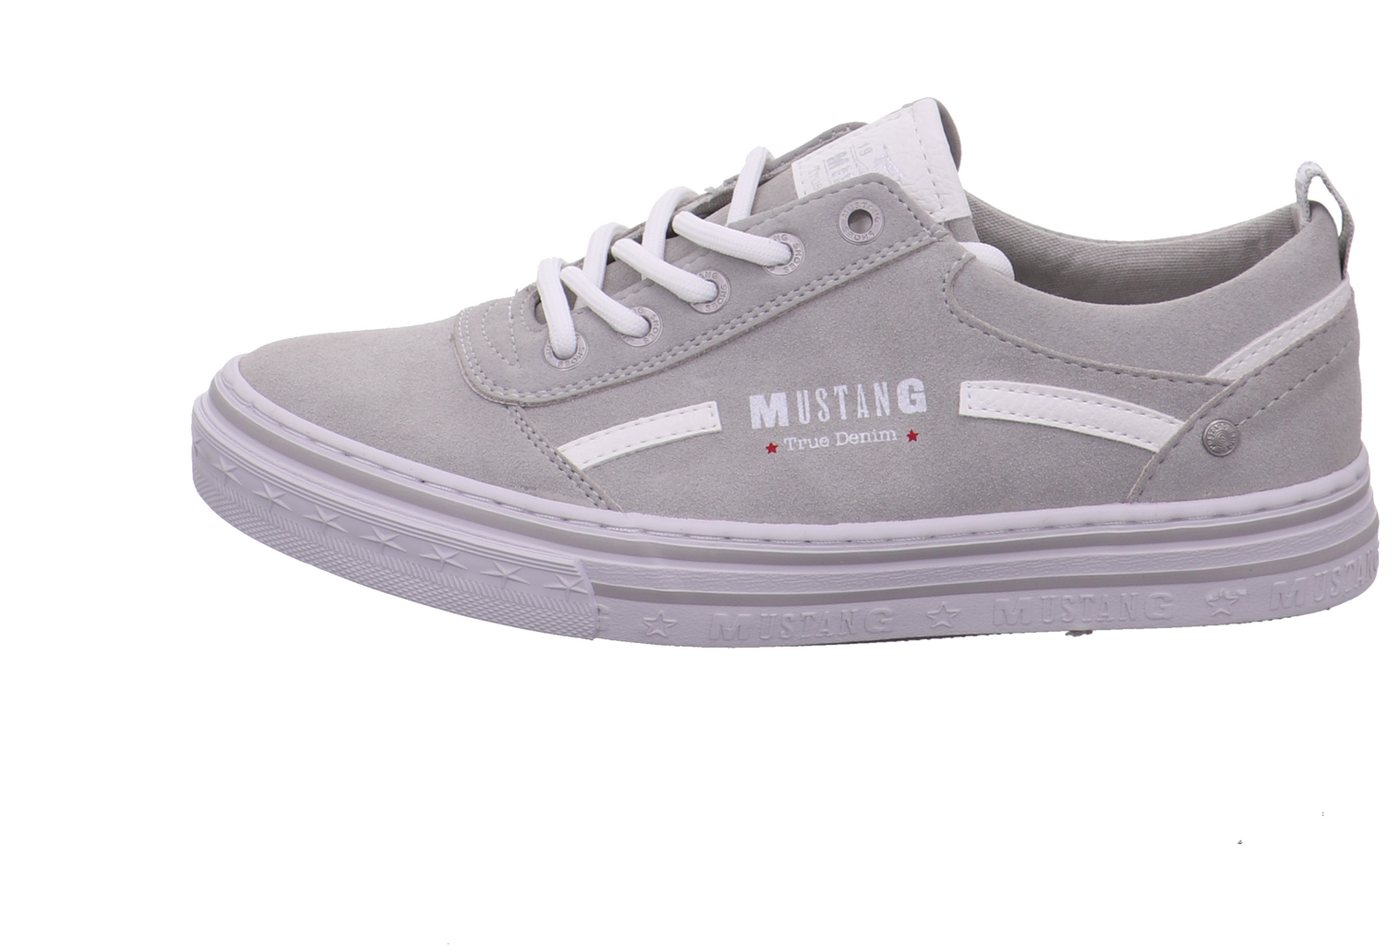 Mustang Shoes Mustang hell-grau Sneaker von Mustang Shoes